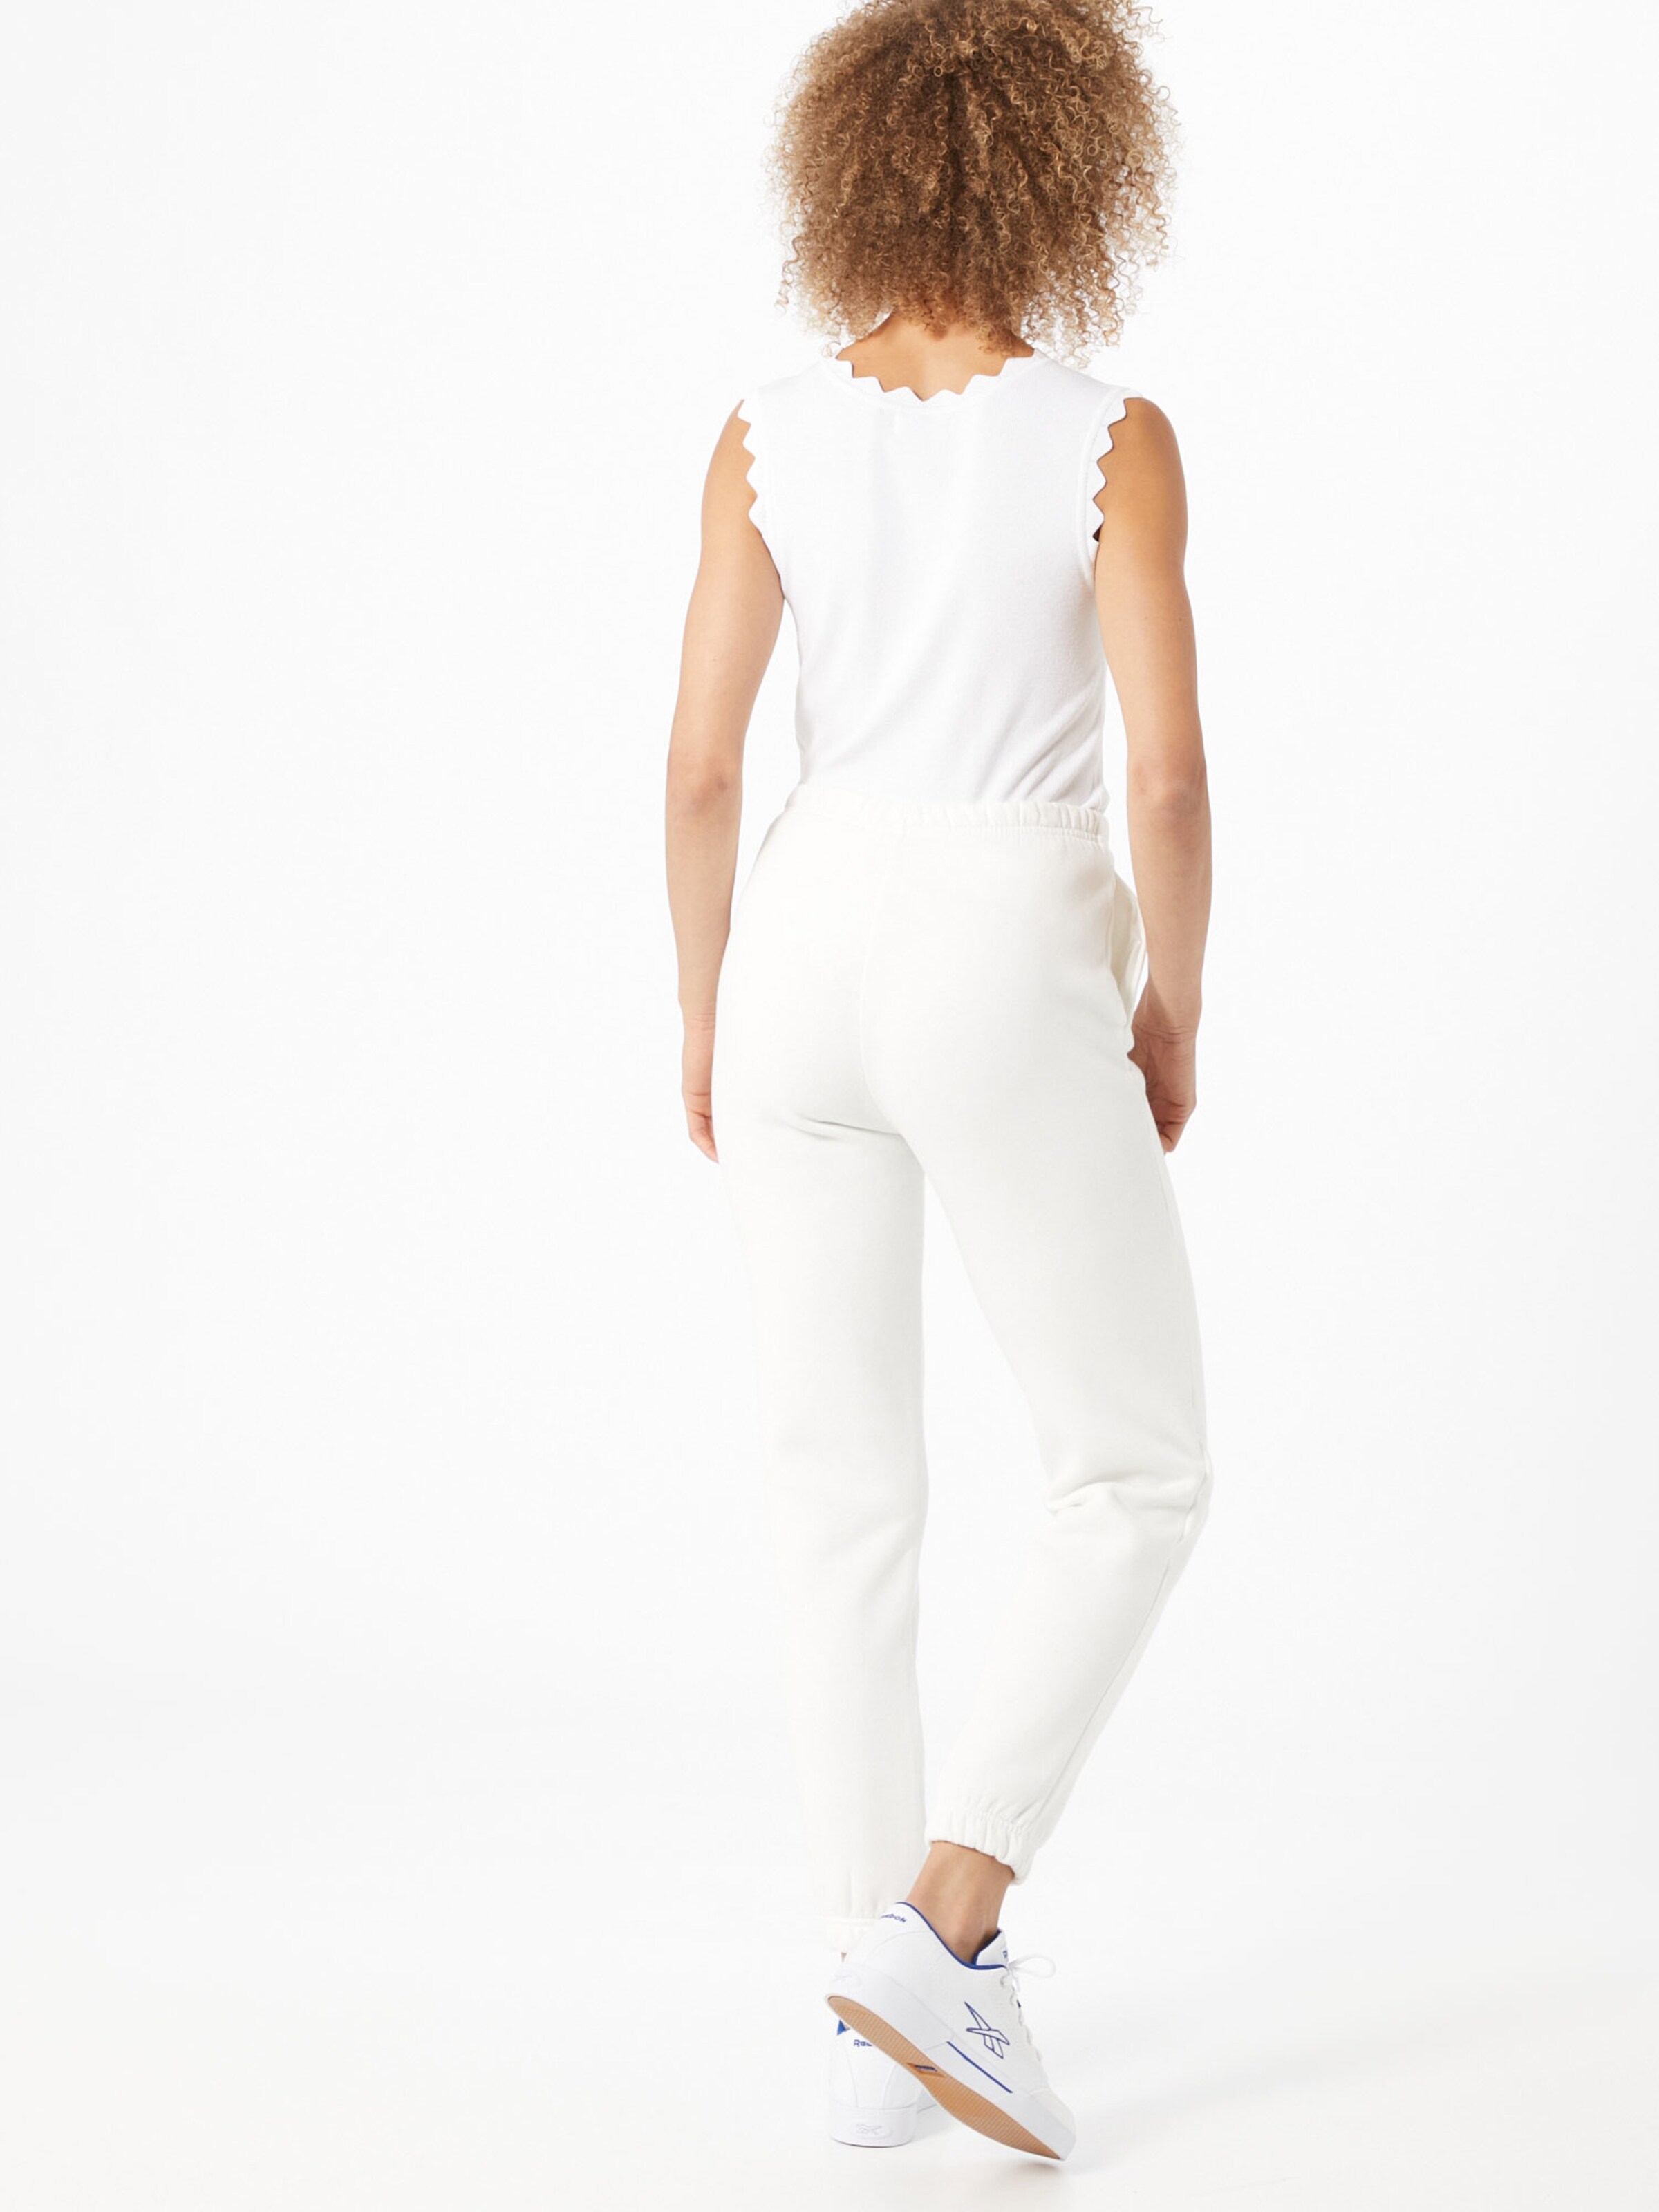 bYkYJ Donna Gina Tricot Pantaloni in Offwhite 